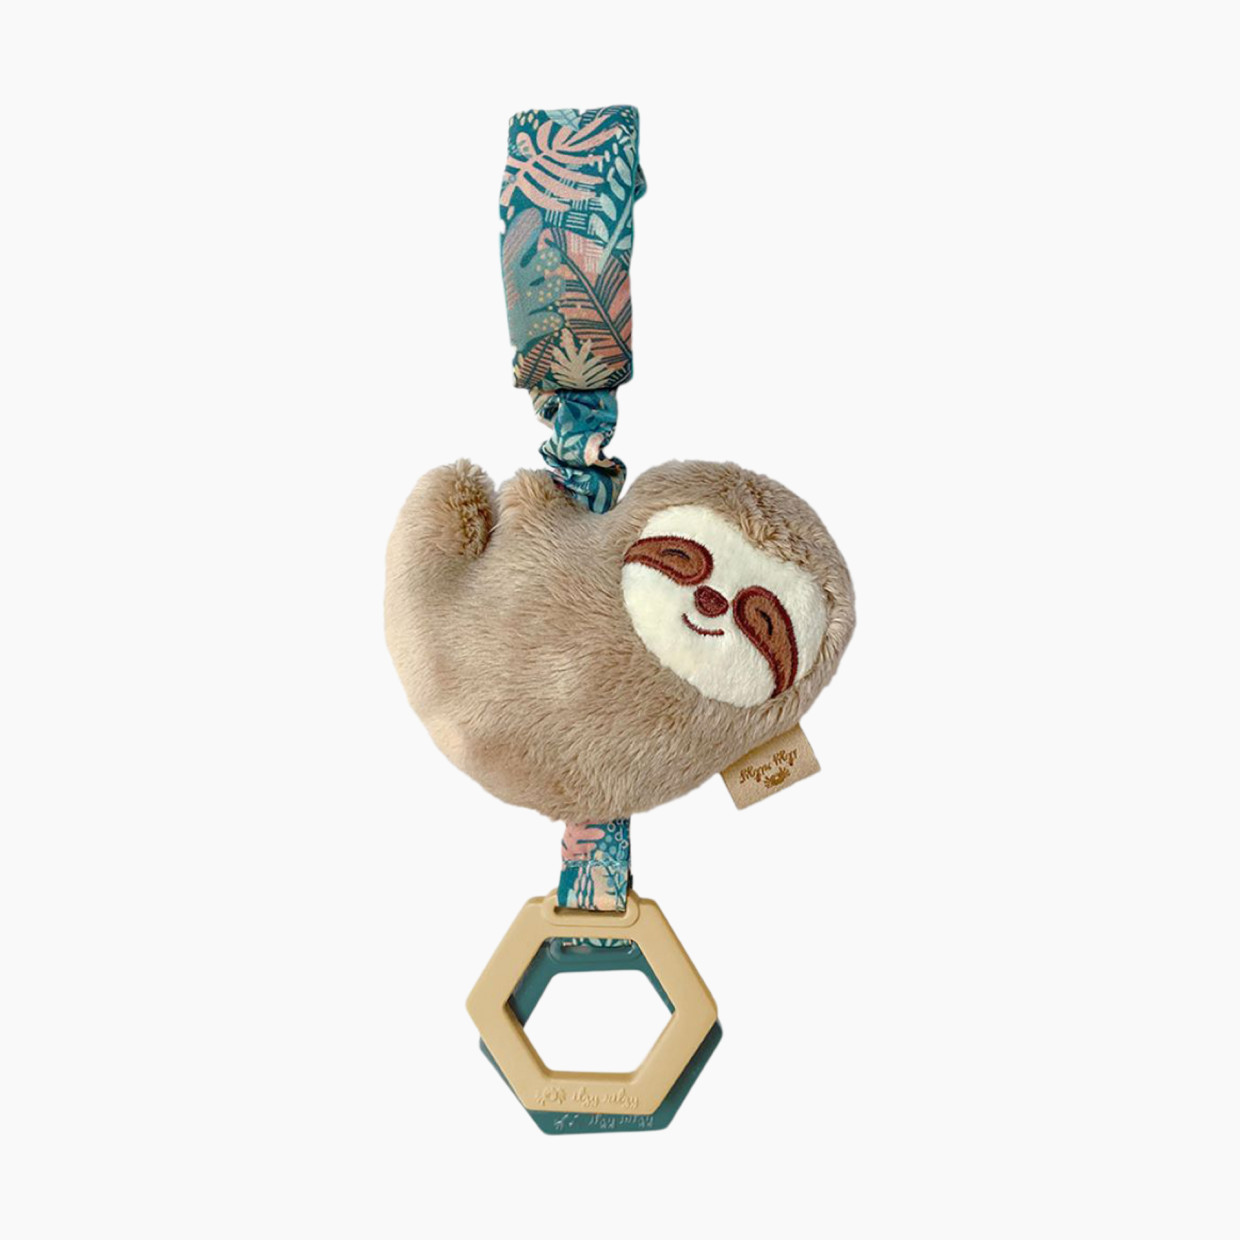 Itzy Ritzy Jingle Attachable Travel Toy - Sloth.